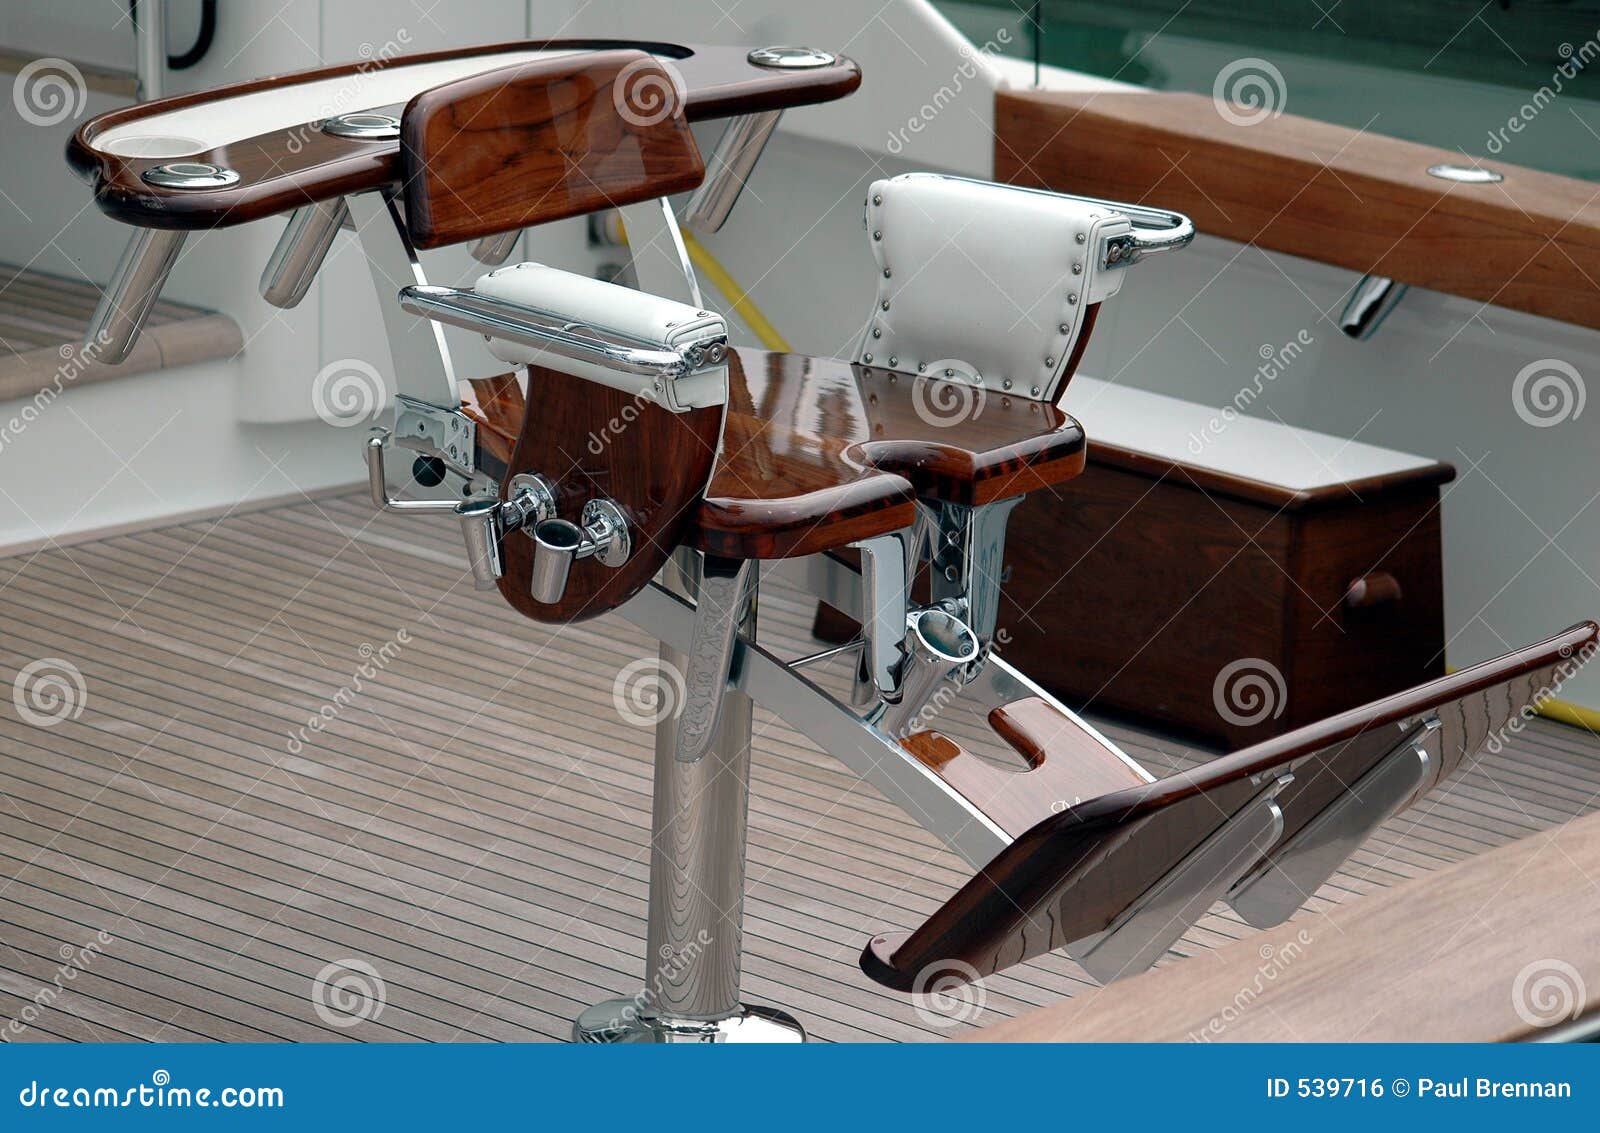 Sport Fishing Chair stock photo. Image of game, fish ...